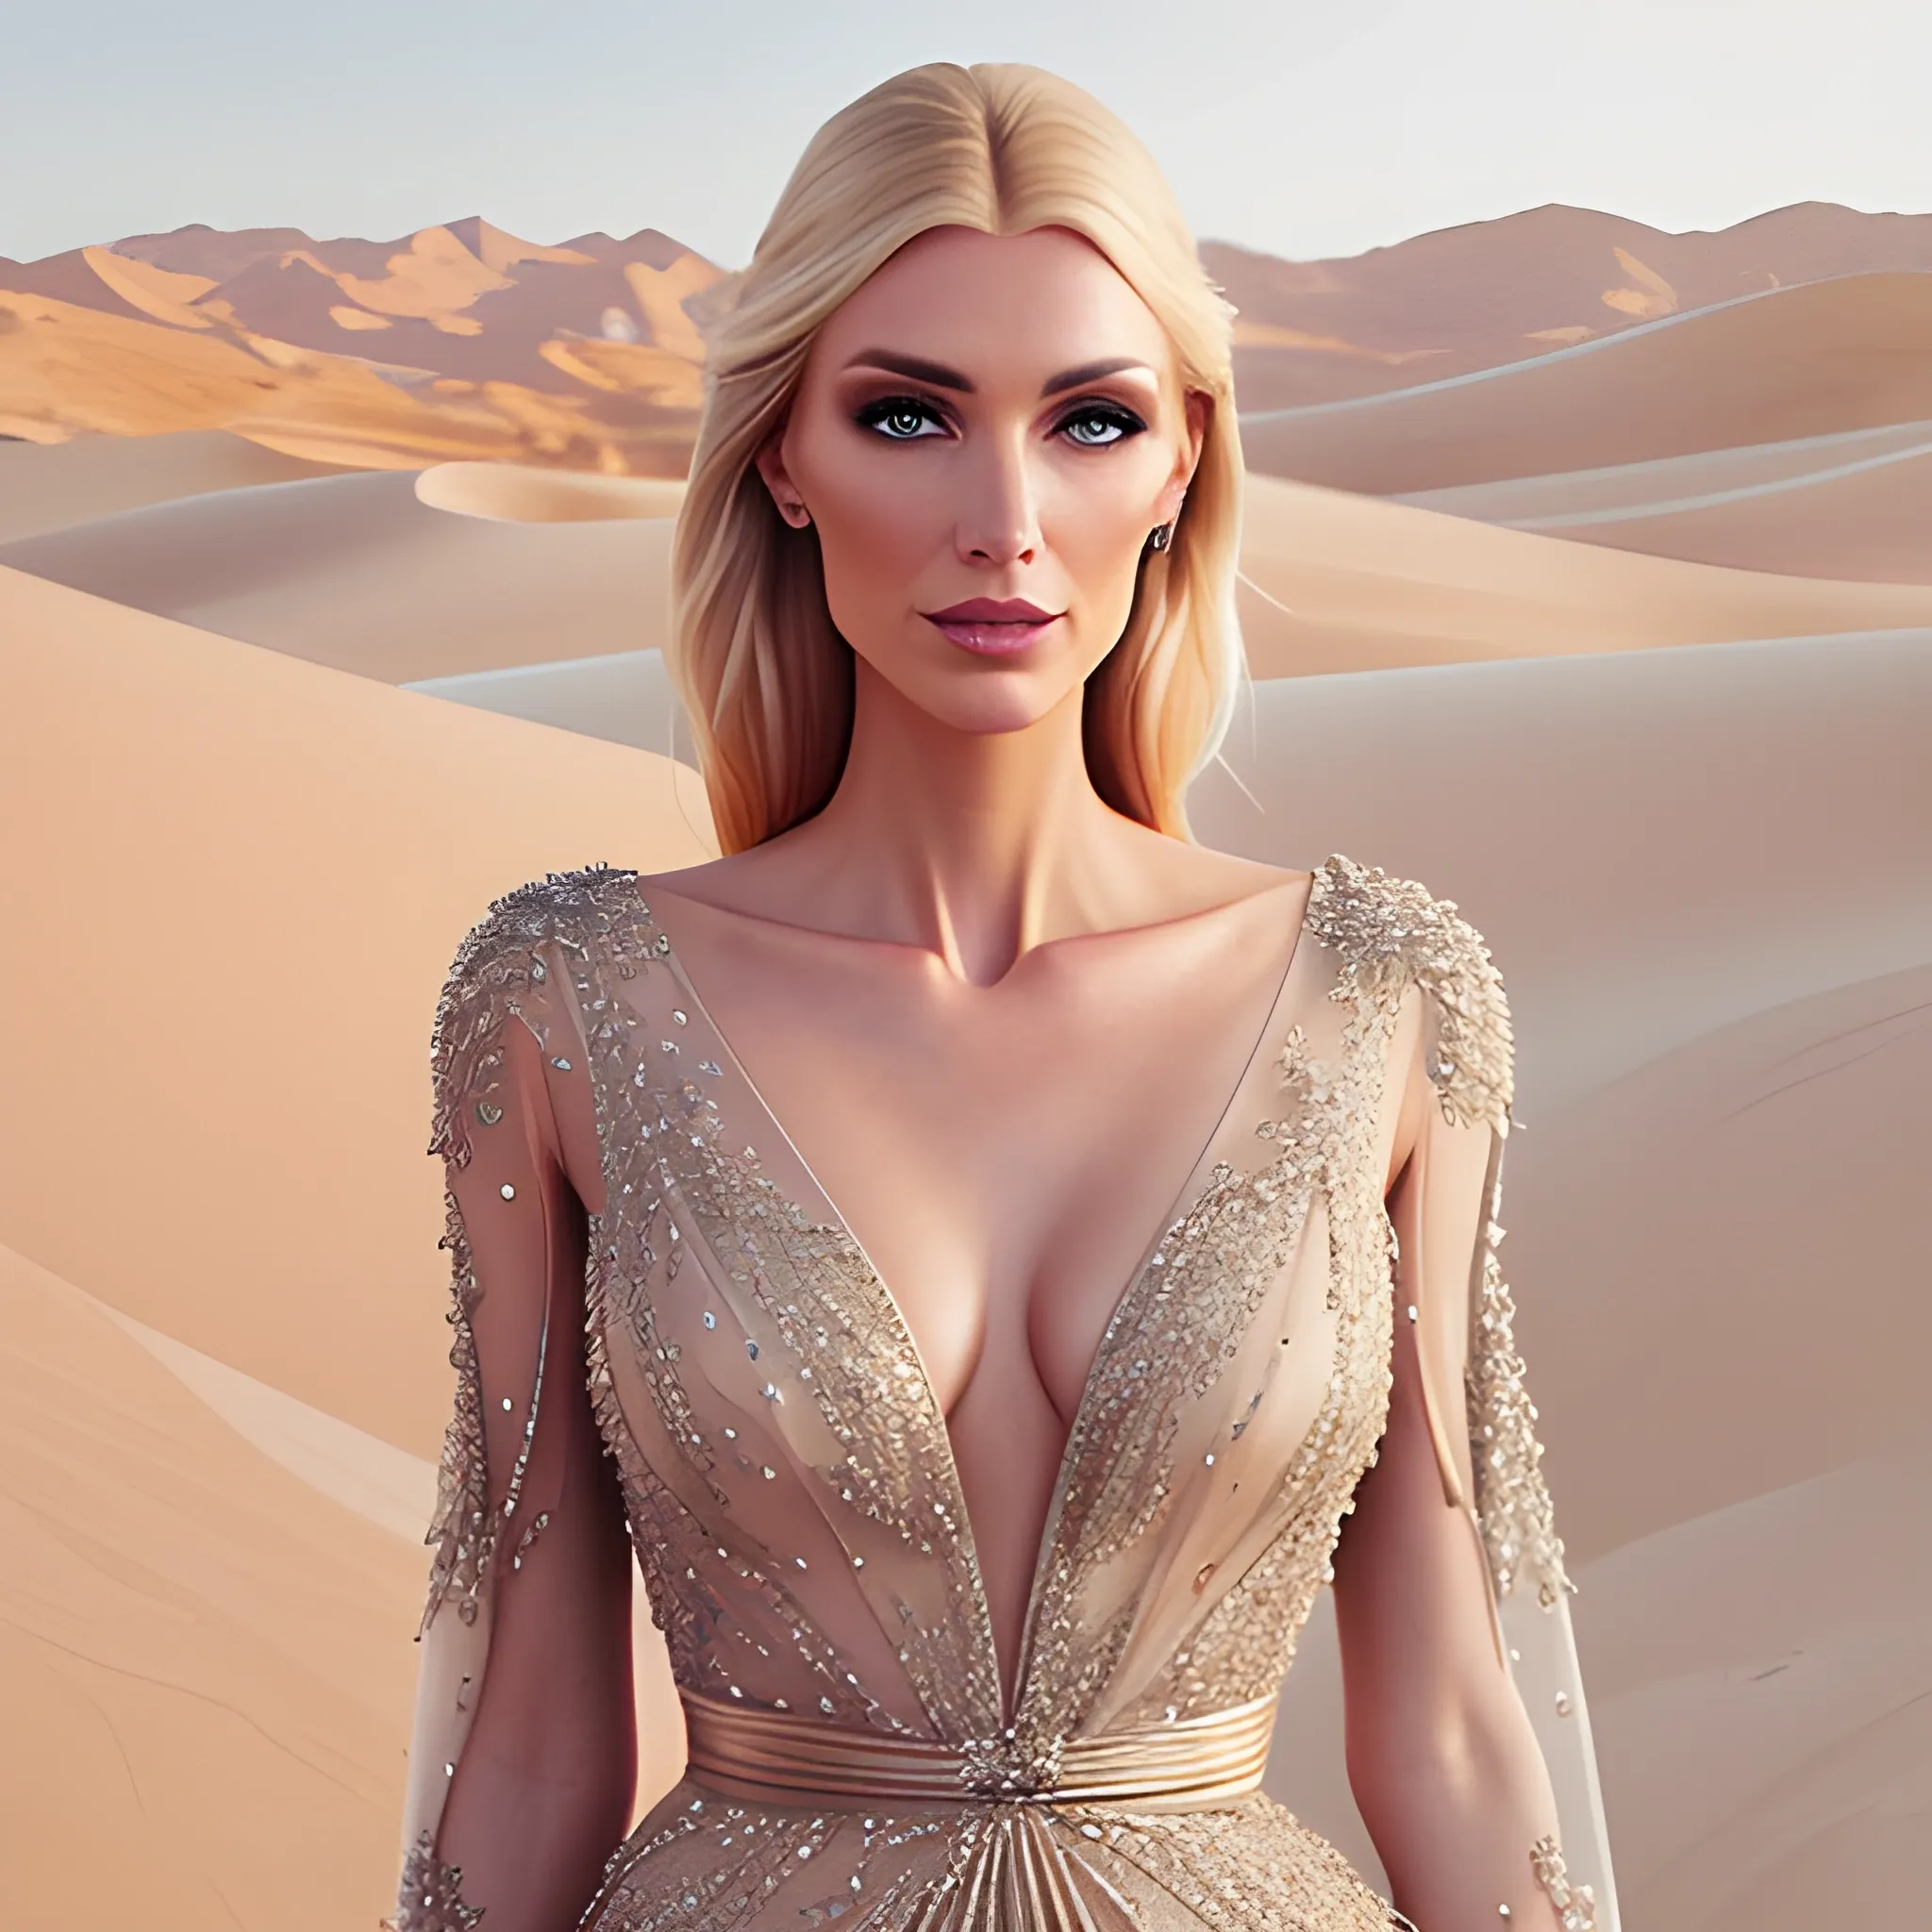 beautiful girl fair, blonde.  wearing Elie Saab garment, with minimal accessory in the middle of the desert. 

realistic, photograph 